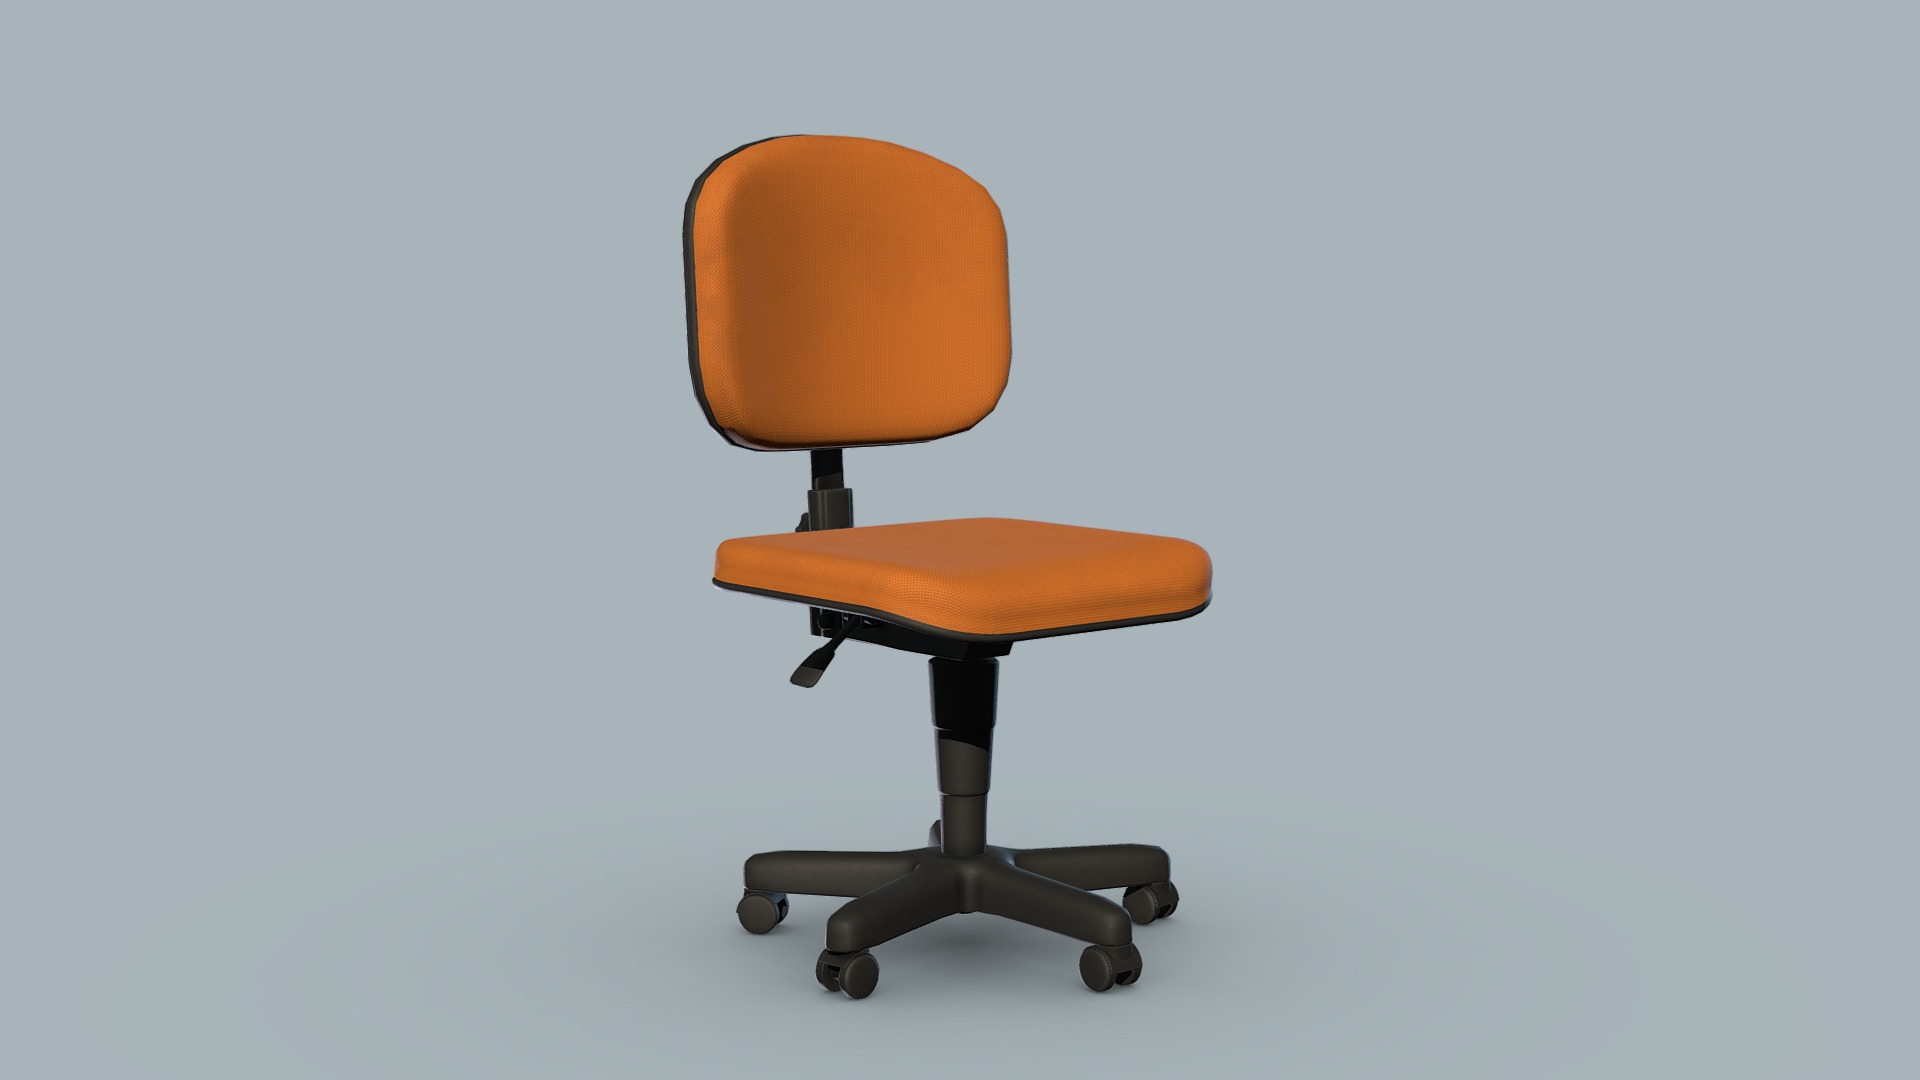 3D model Office Chair - This is a 3D model of the Office Chair. The 3D model is about an orange office chair.